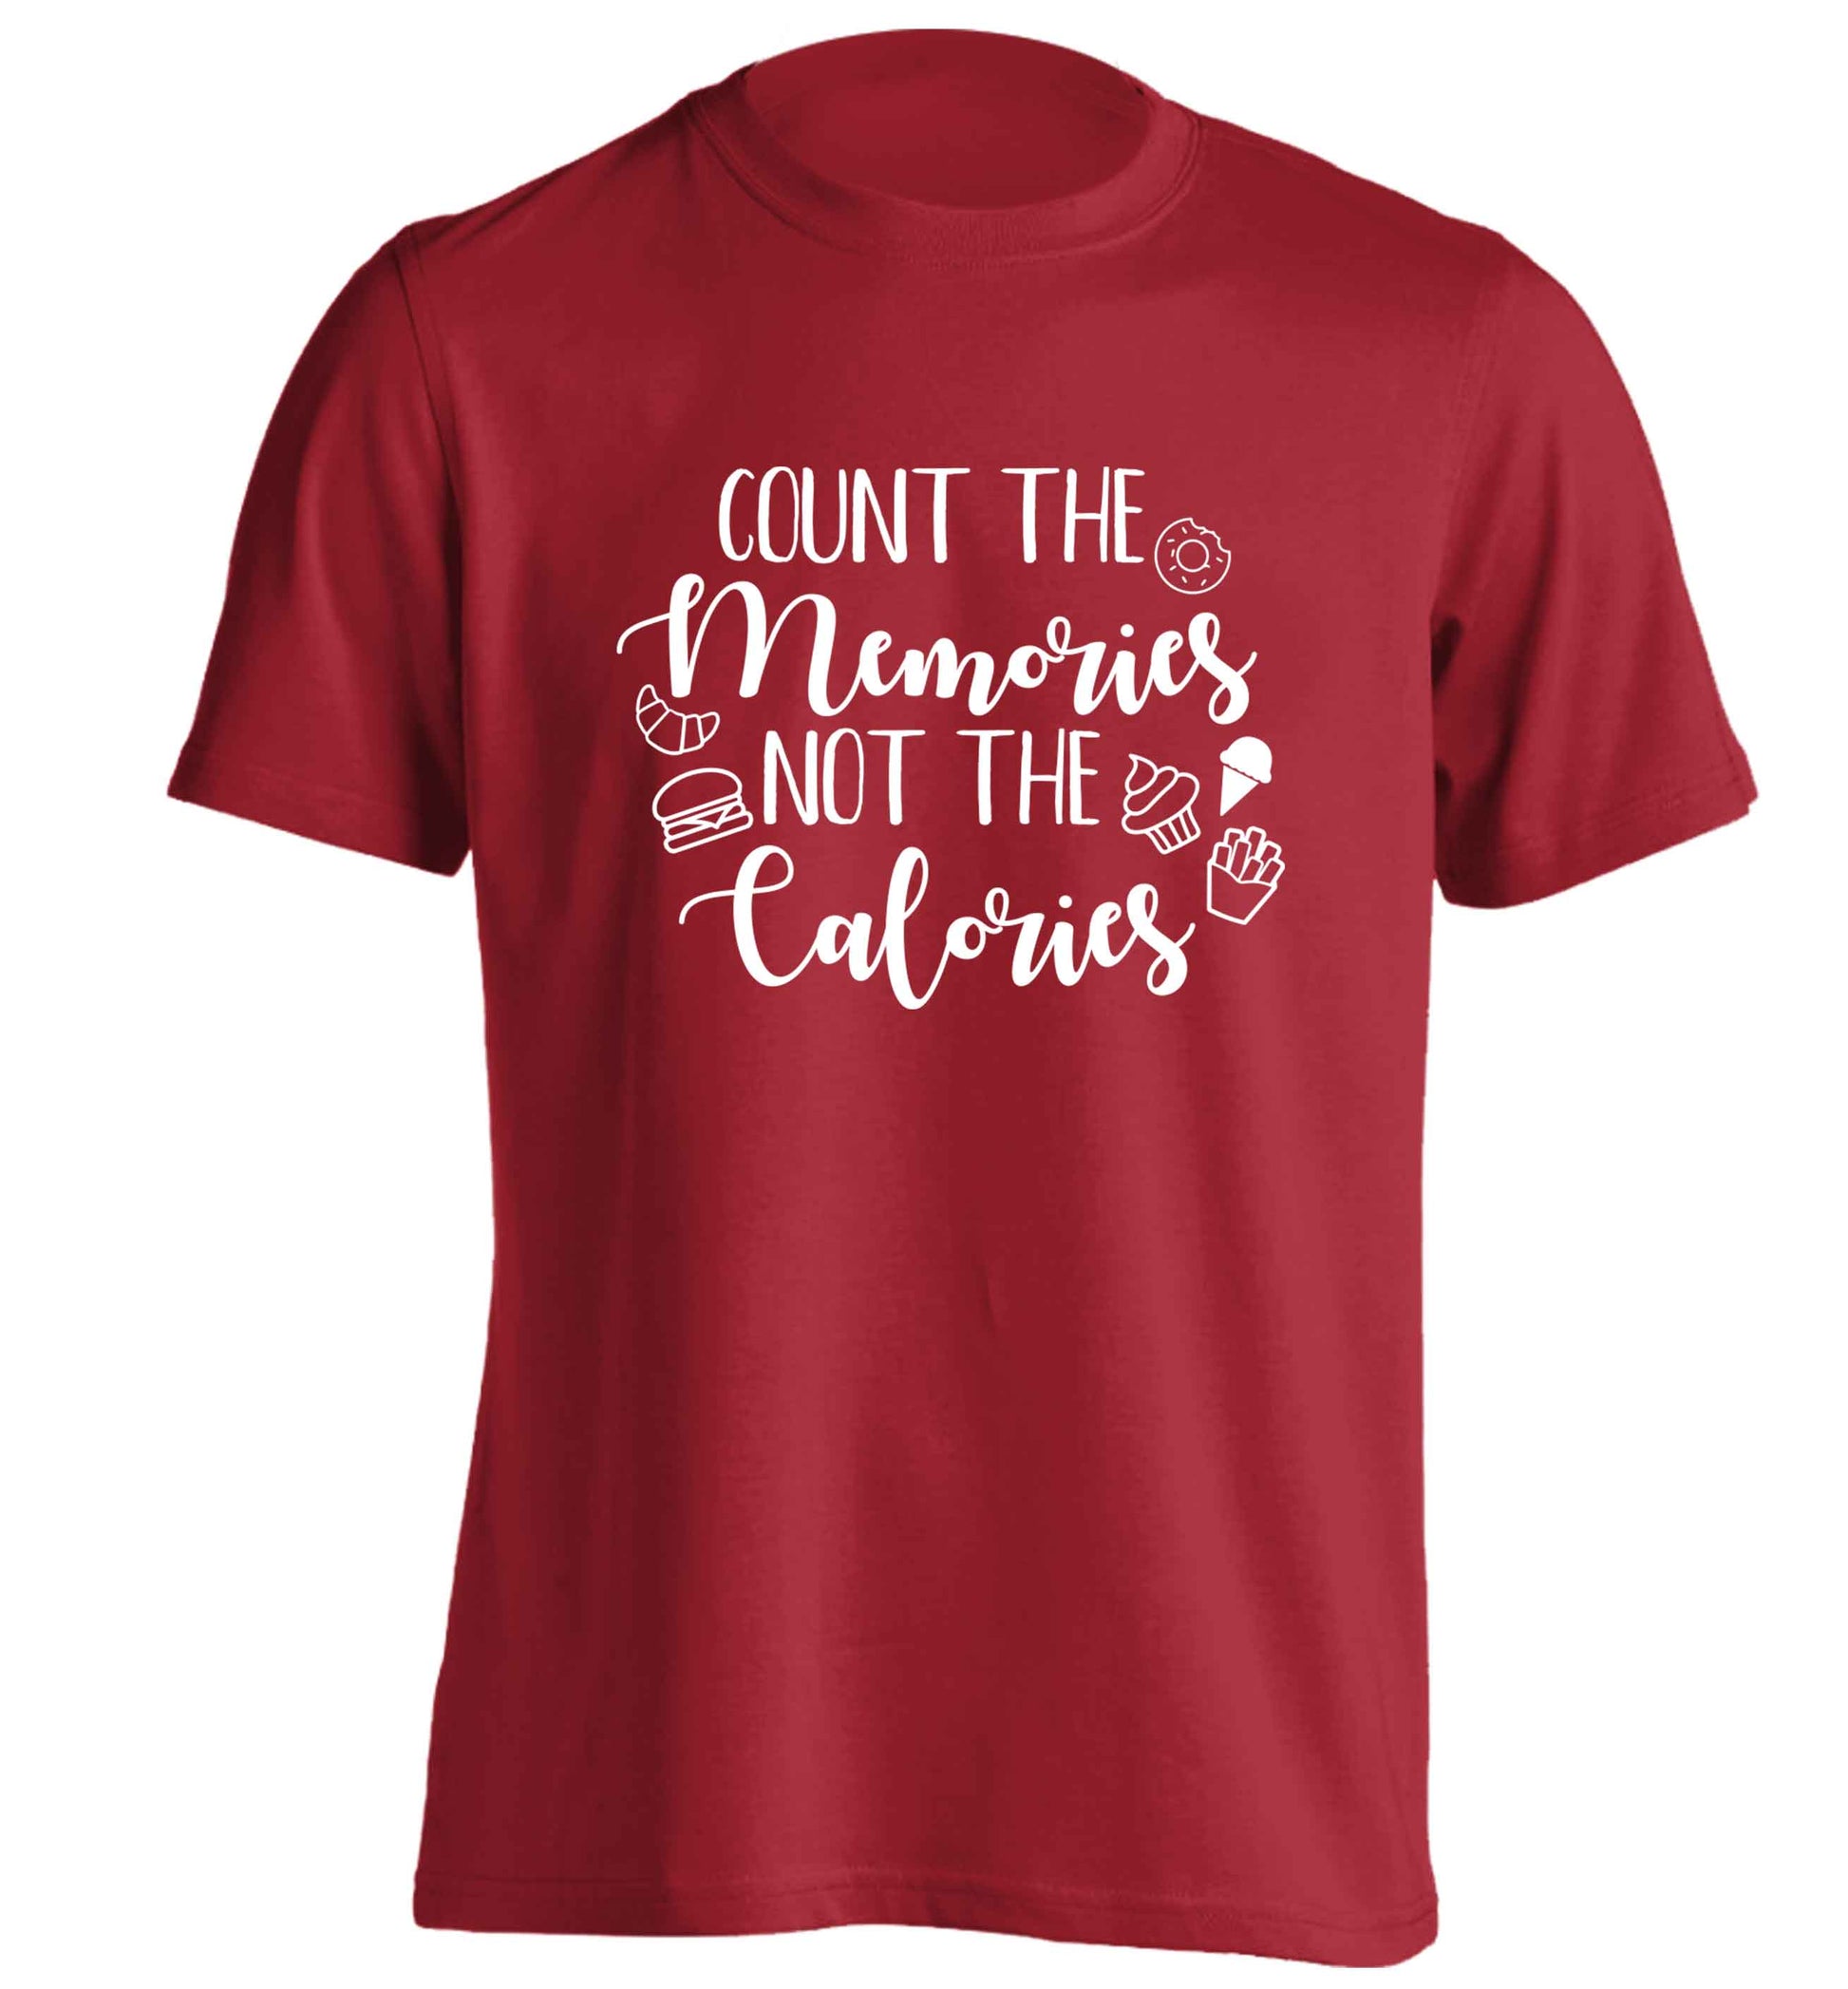 Count the memories not the calories adults unisex red Tshirt 2XL